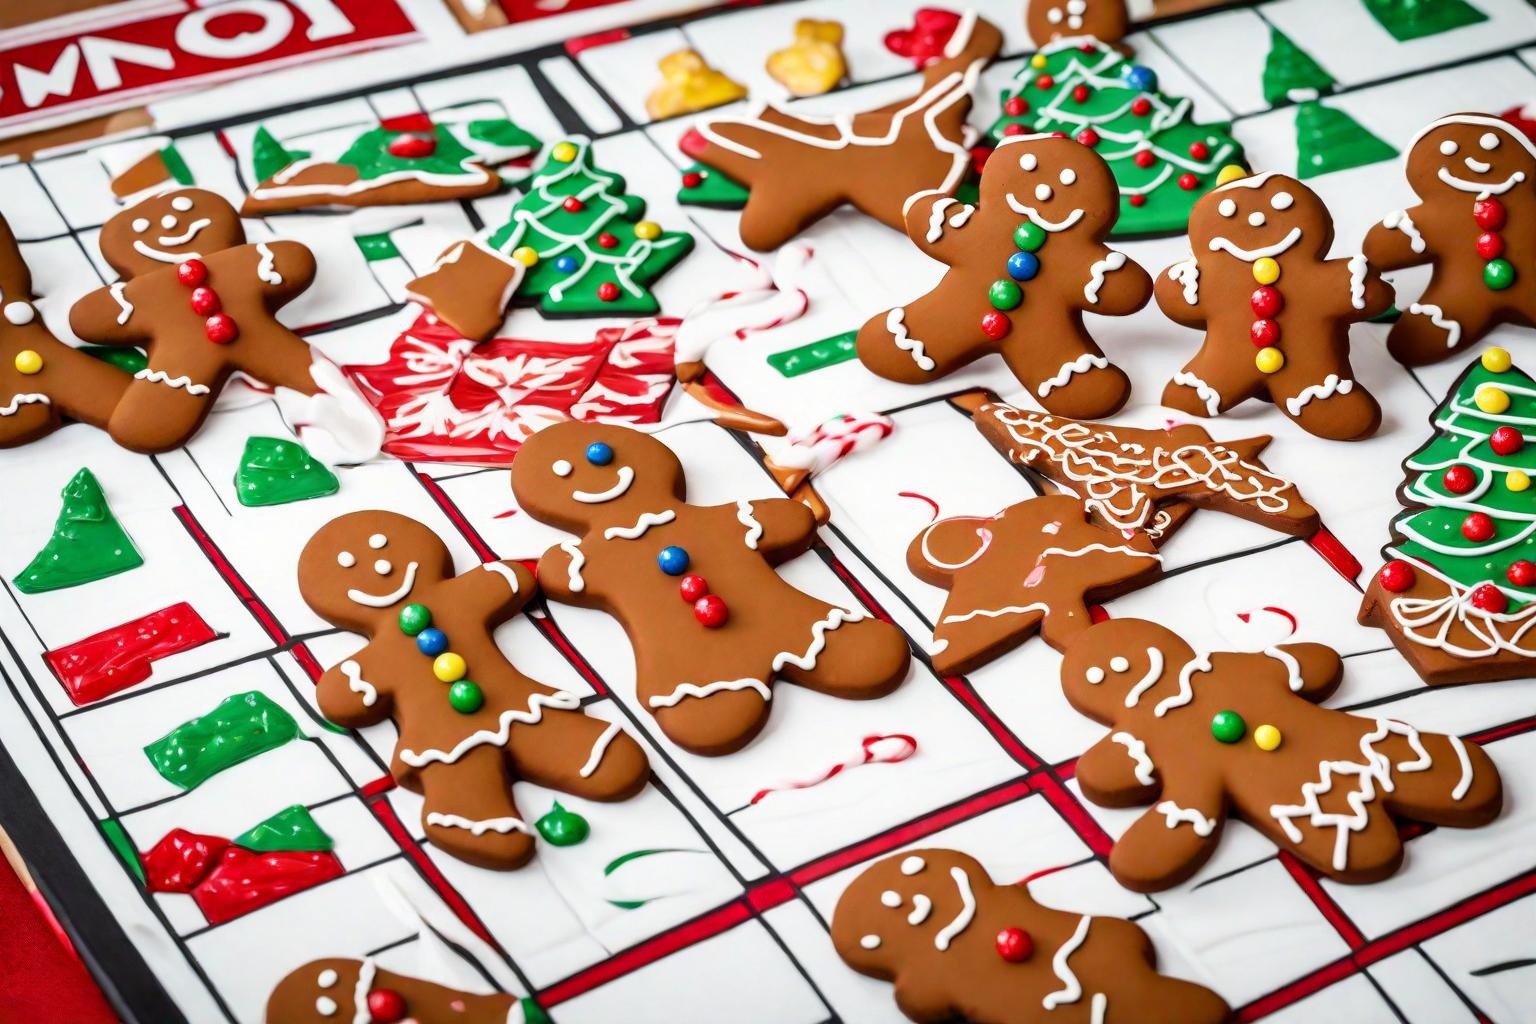 gingerbread galore monopoly go